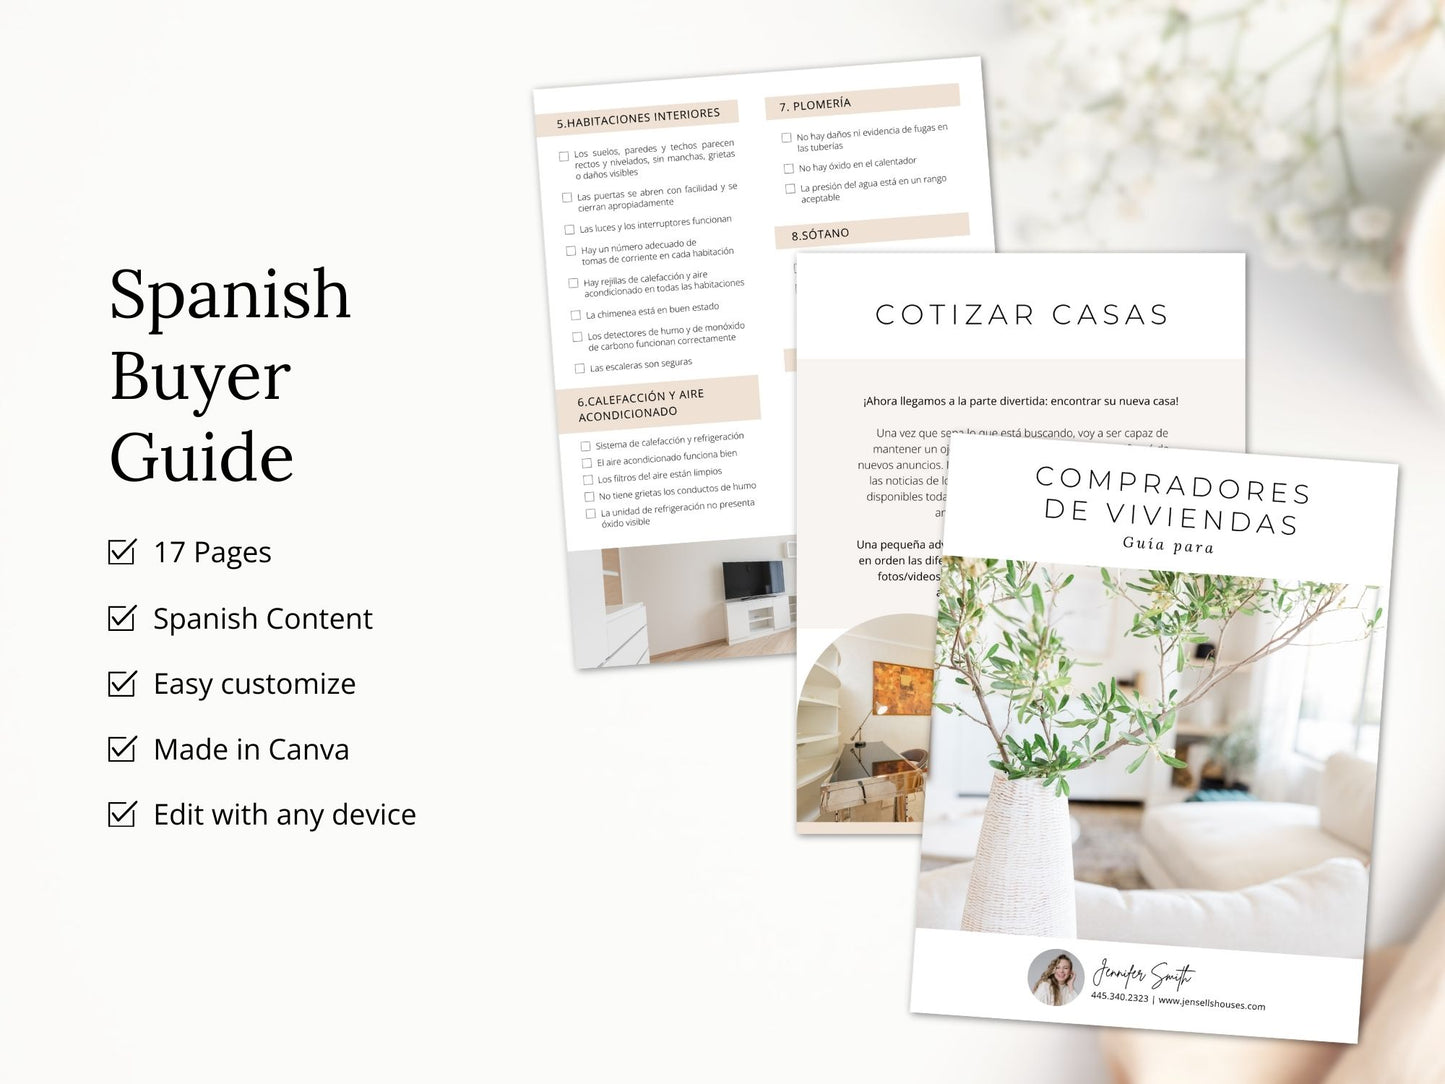 Spanish Real Estate Buyer Guide - Comprehensive Real Estate Resource in Spanish